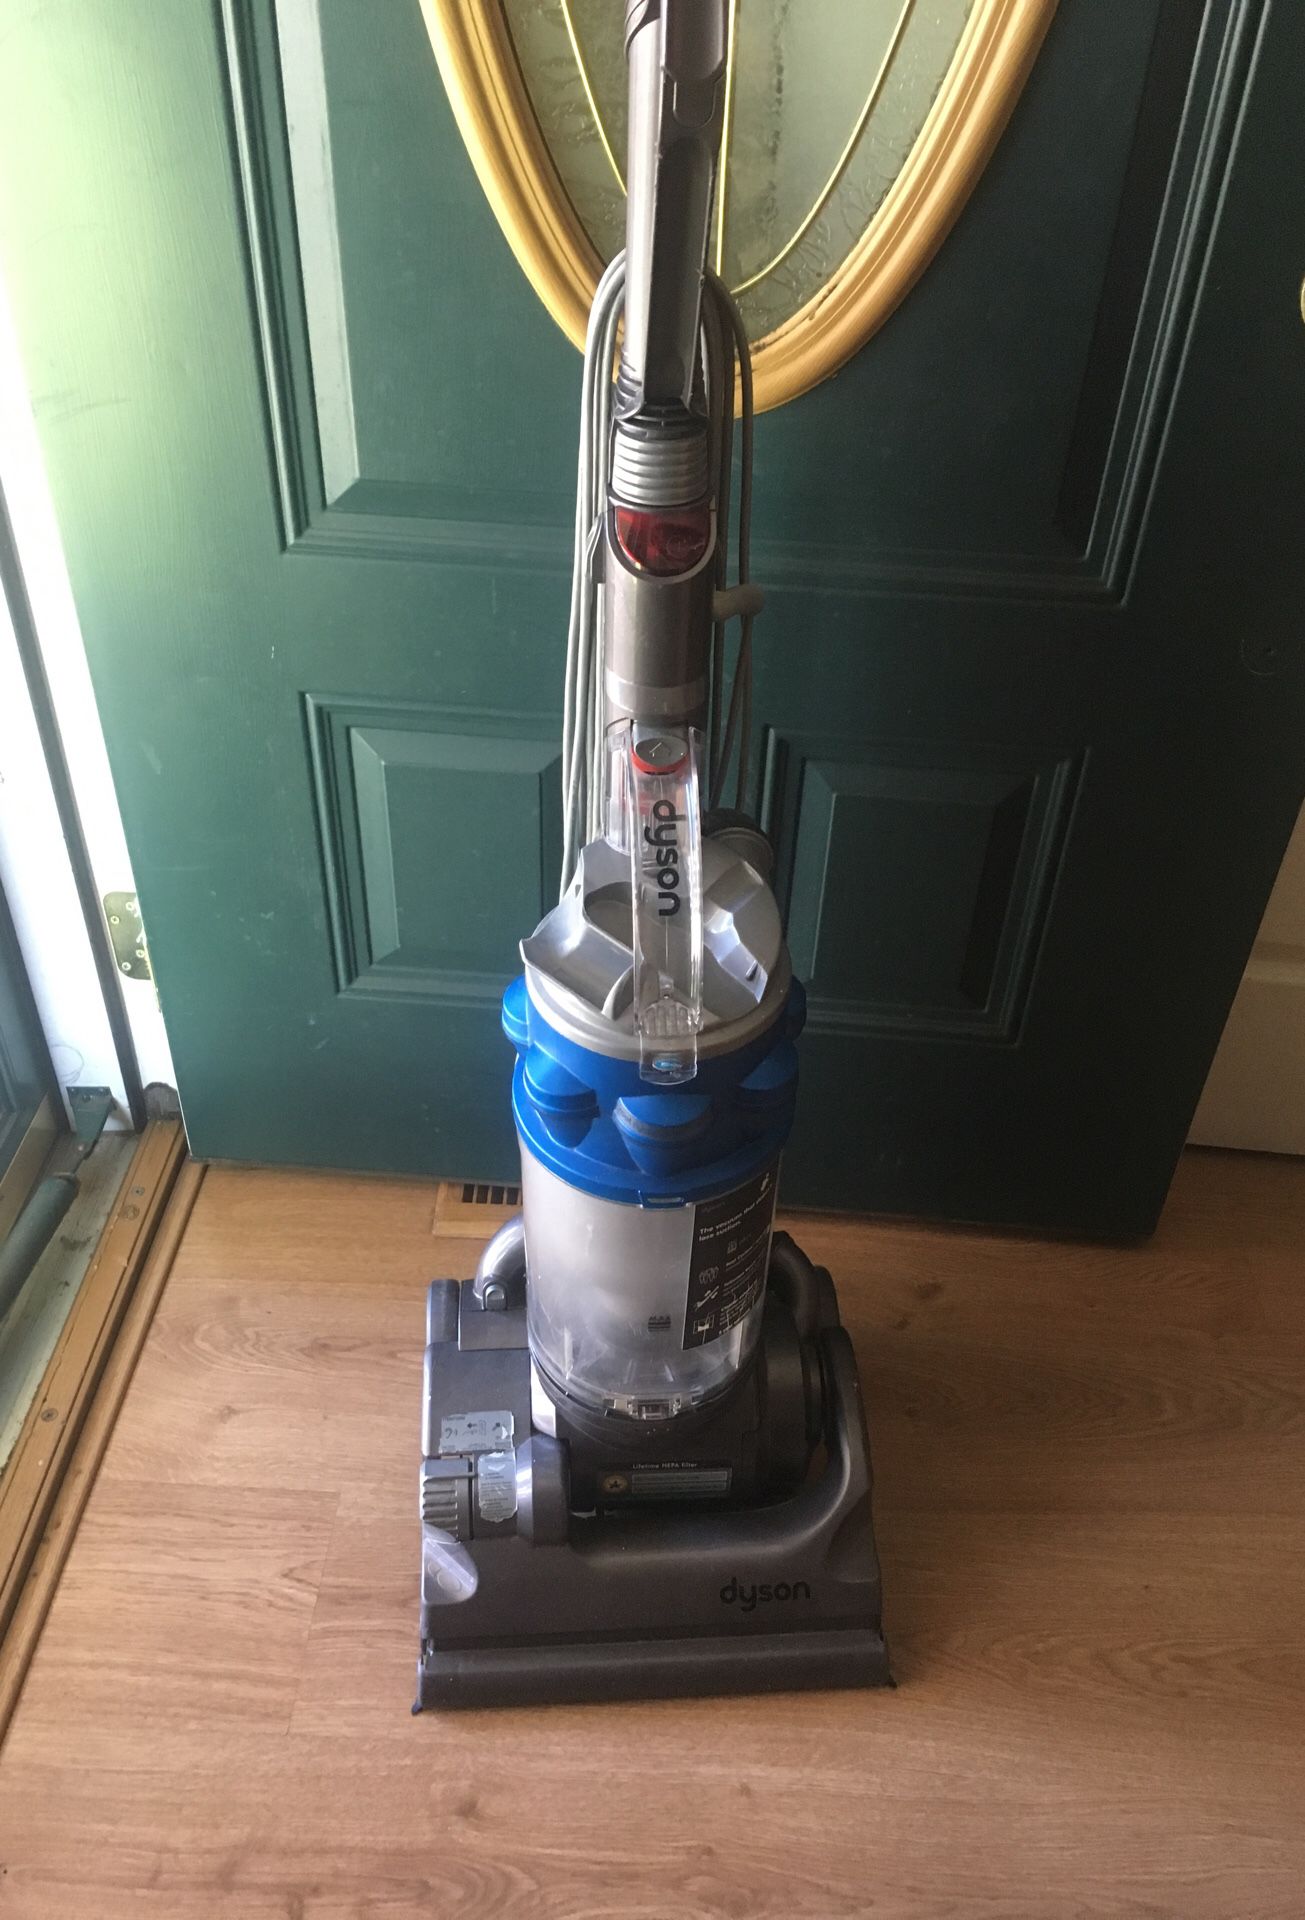 Dyson vacuum cleaner Serial # 579-US-A 33894 Model # DC 14